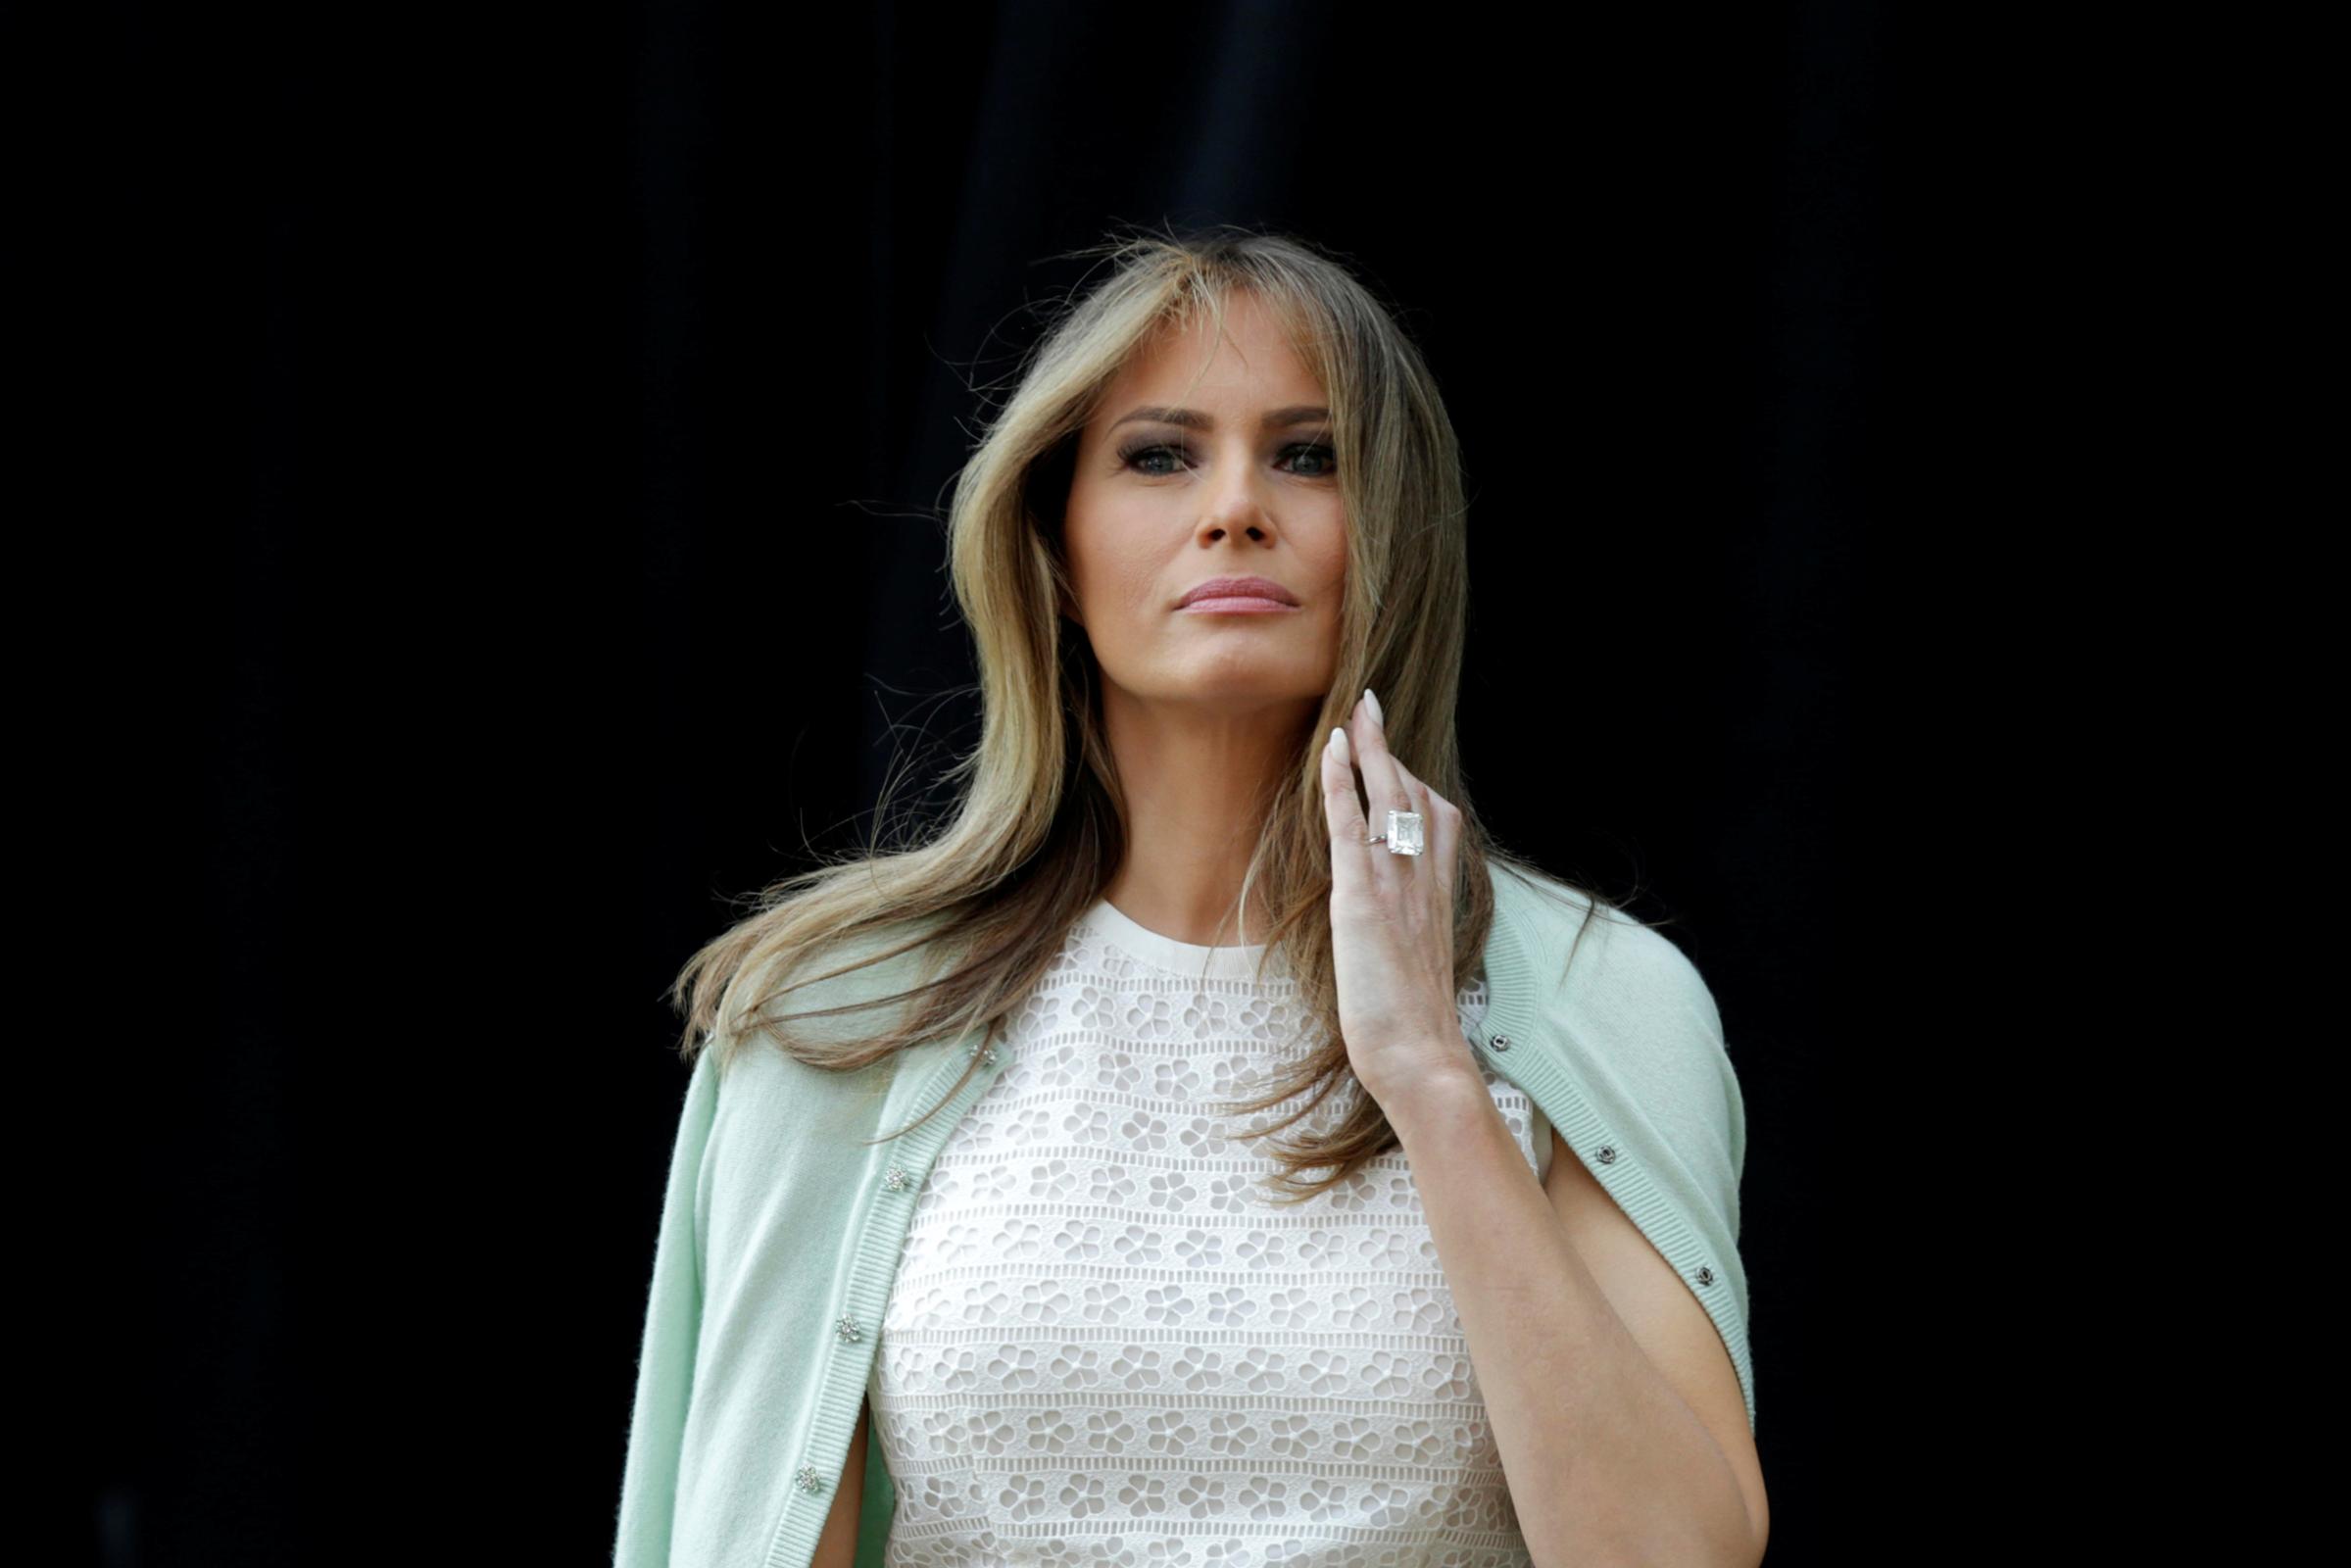 First lady Melania Trump wearing Giambattista Valli dress and a pale green cardigan, attends the opening of Bunny Mellon Healing Garden at Children's National Medical Center in Washington, D.C., April 28, 2017.